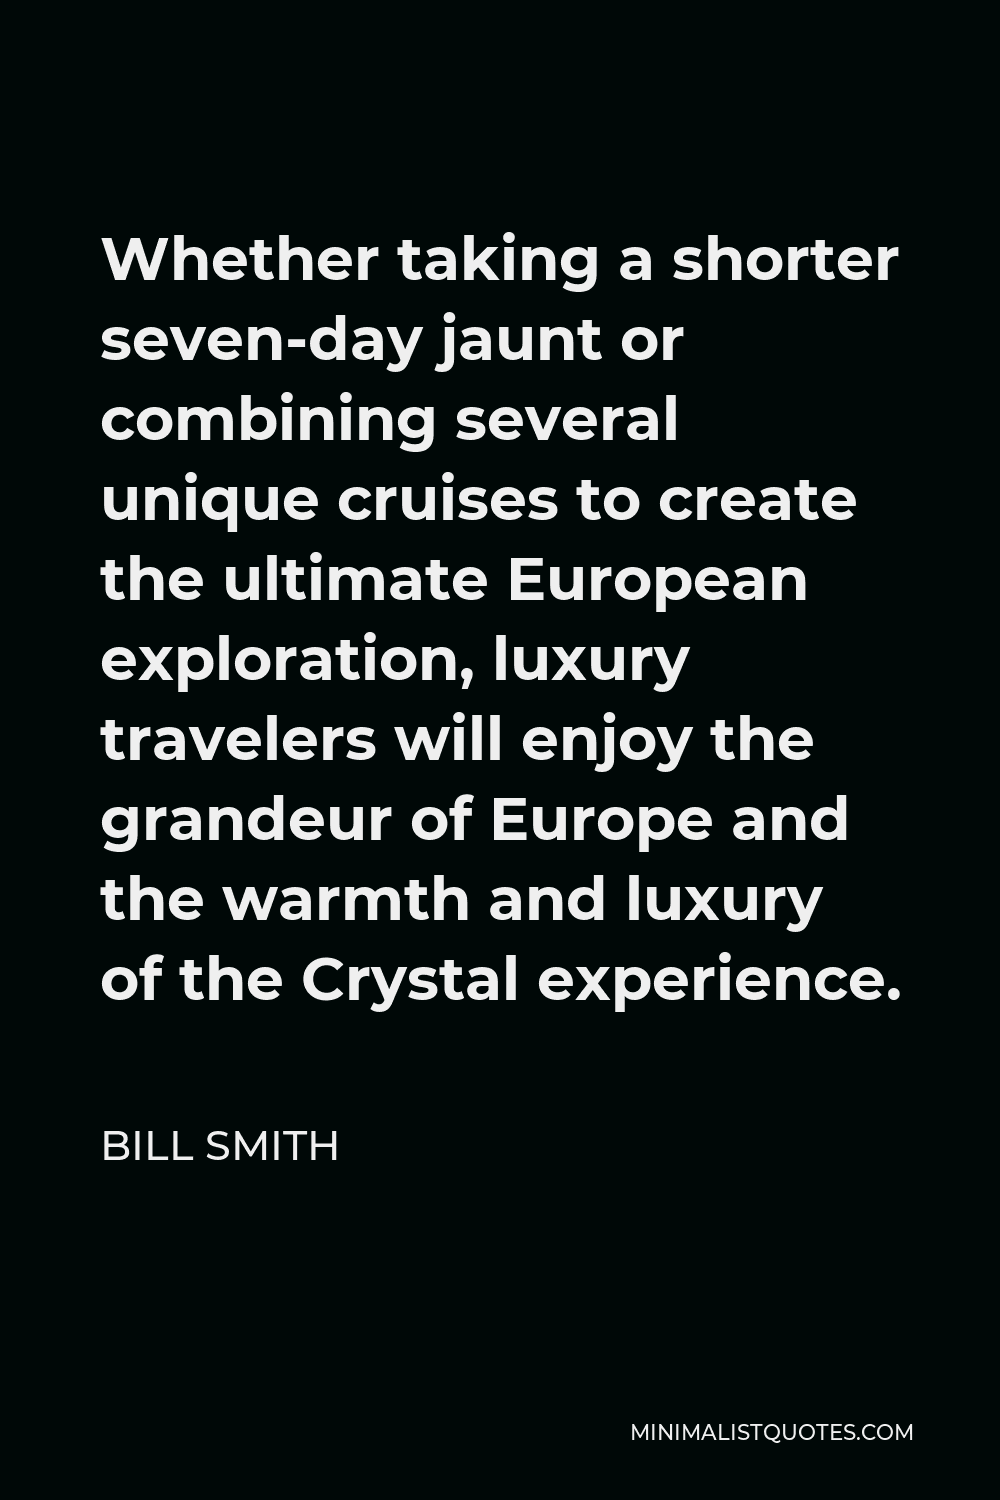 Bill Smith Quote - Whether taking a shorter seven-day jaunt or combining several unique cruises to create the ultimate European exploration, luxury travelers will enjoy the grandeur of Europe and the warmth and luxury of the Crystal experience.